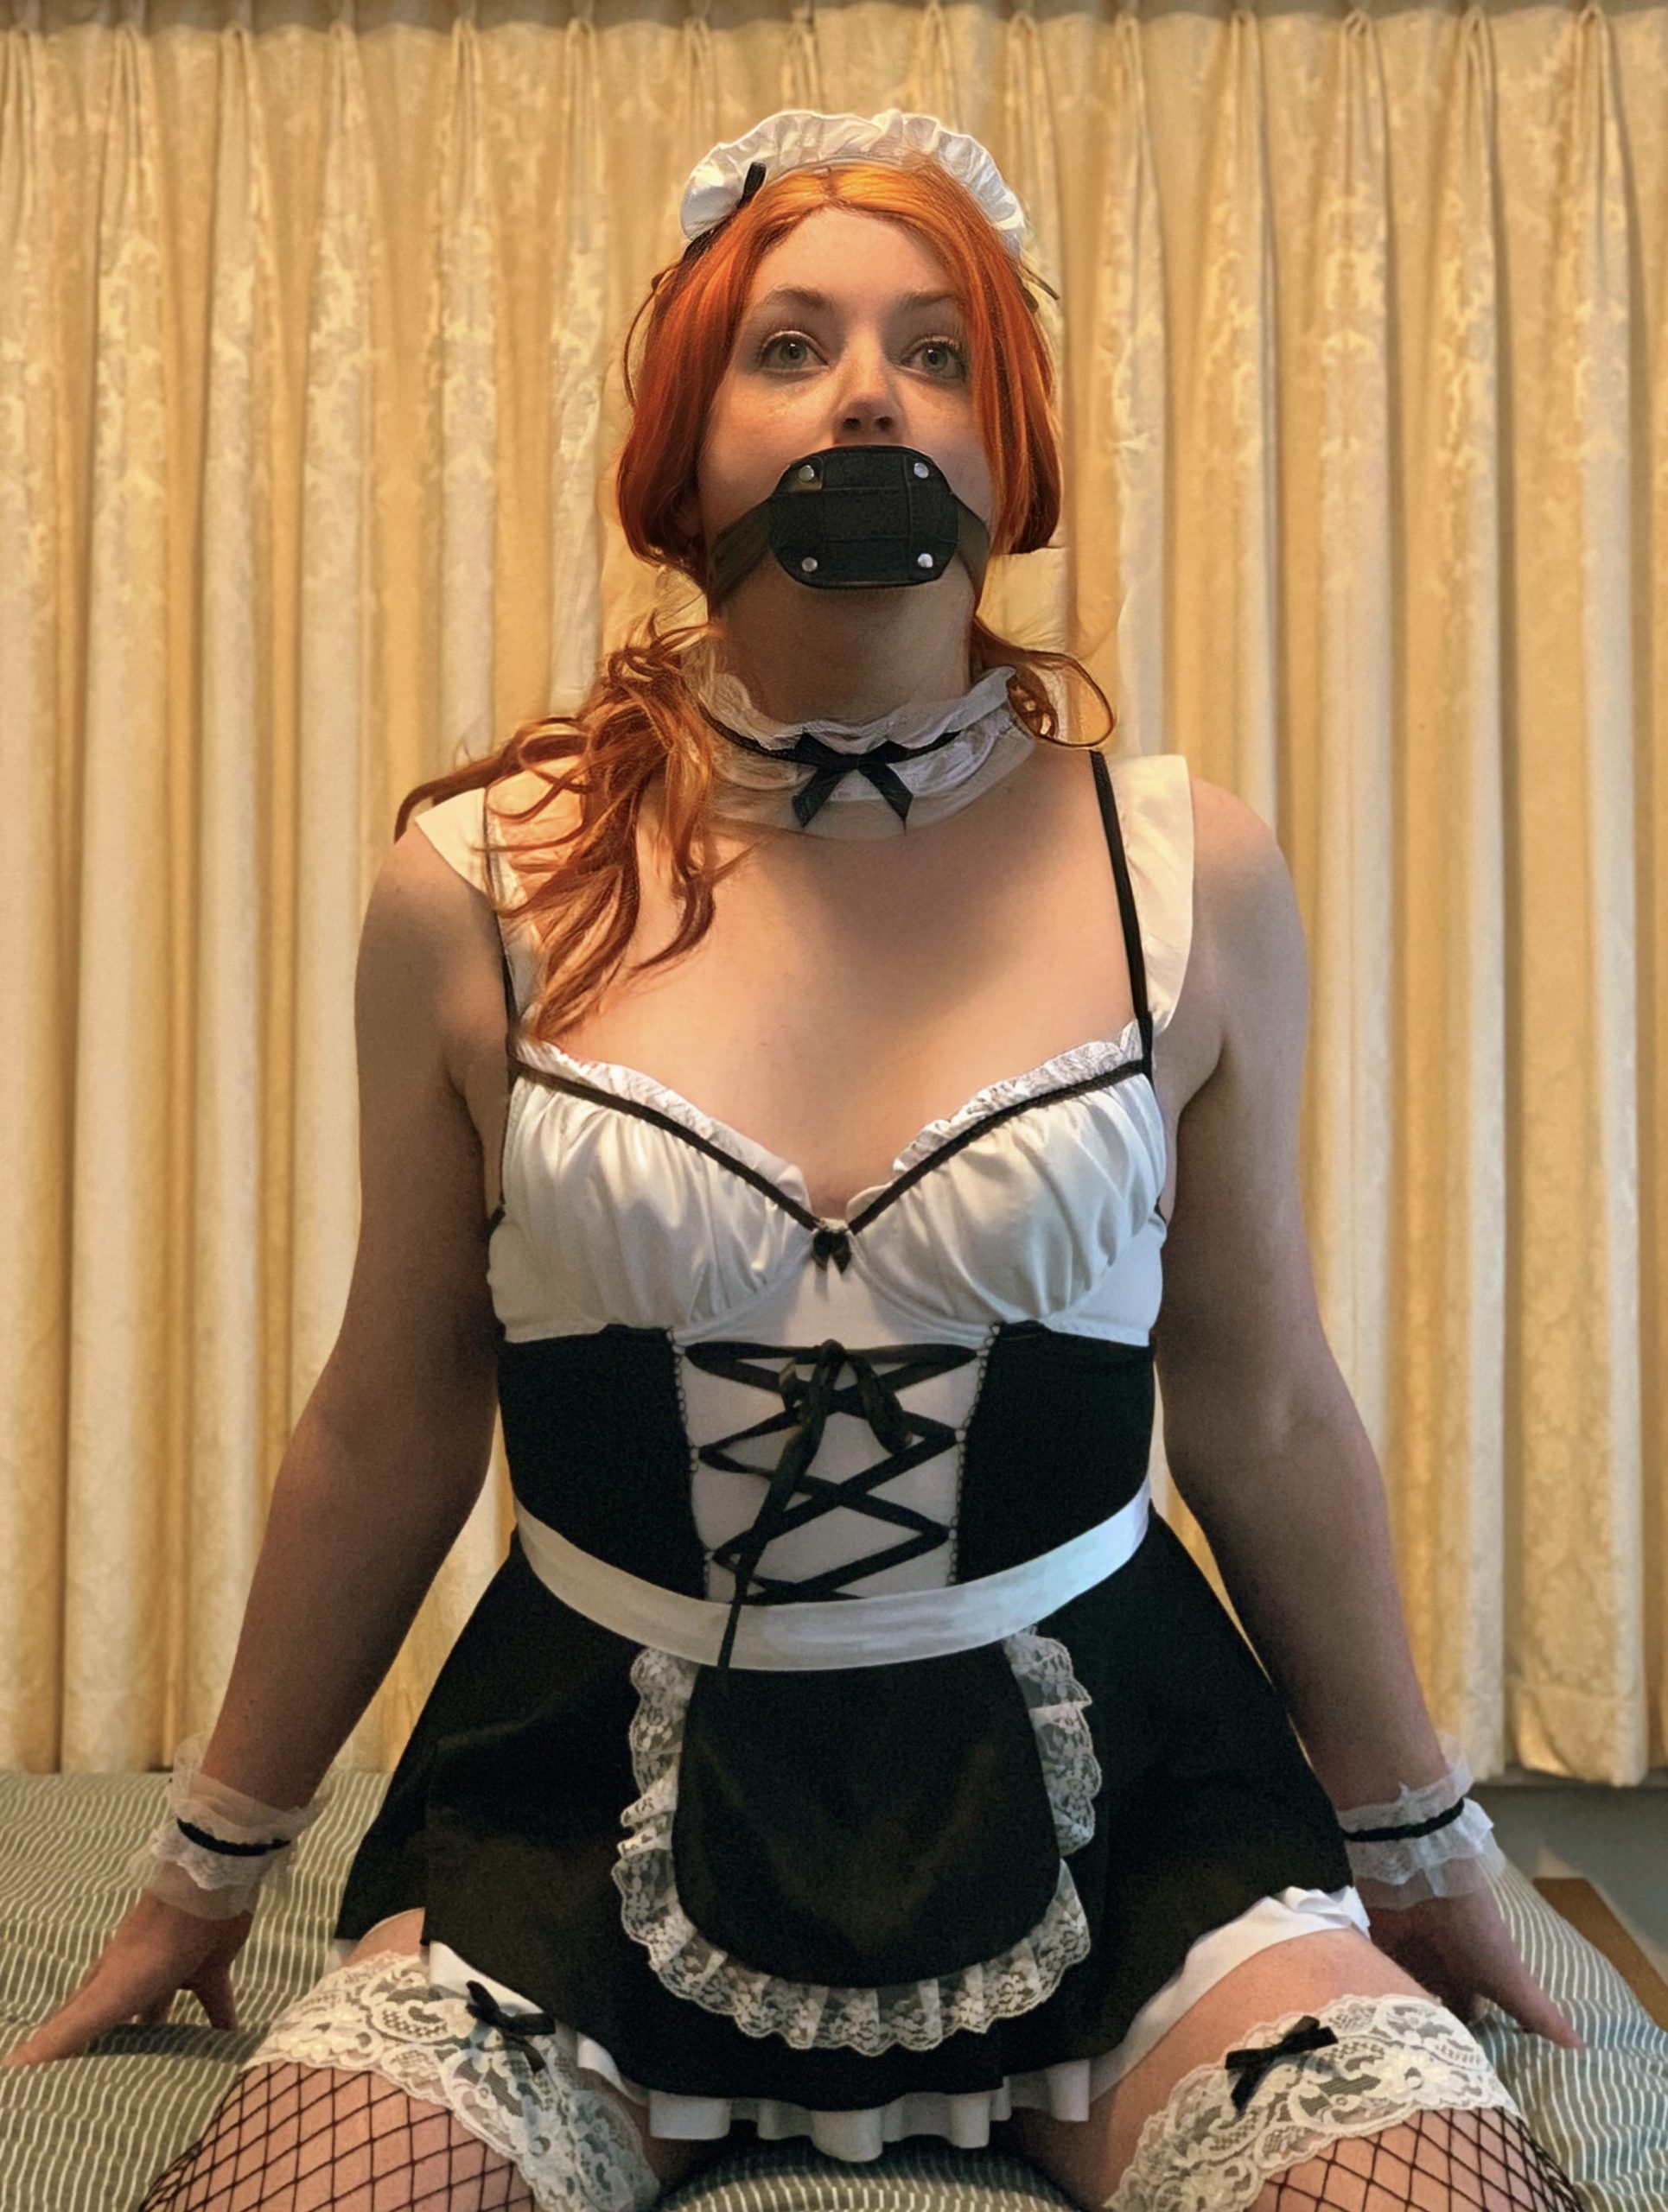 Sissy Maid wh0re